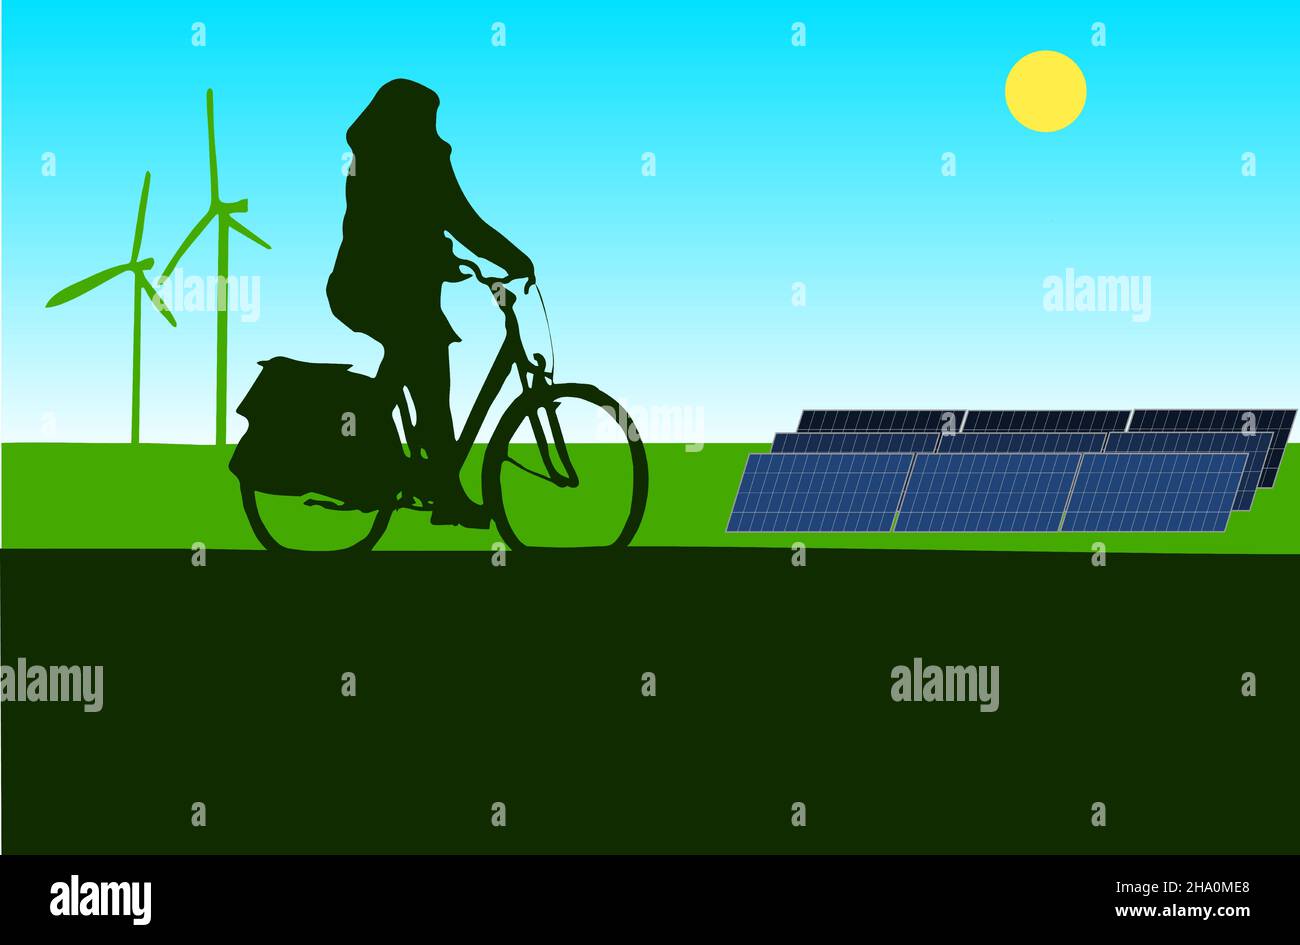 silhouette of a woman on a bicycle through a landscape with solar panels and windmills Stock Vector